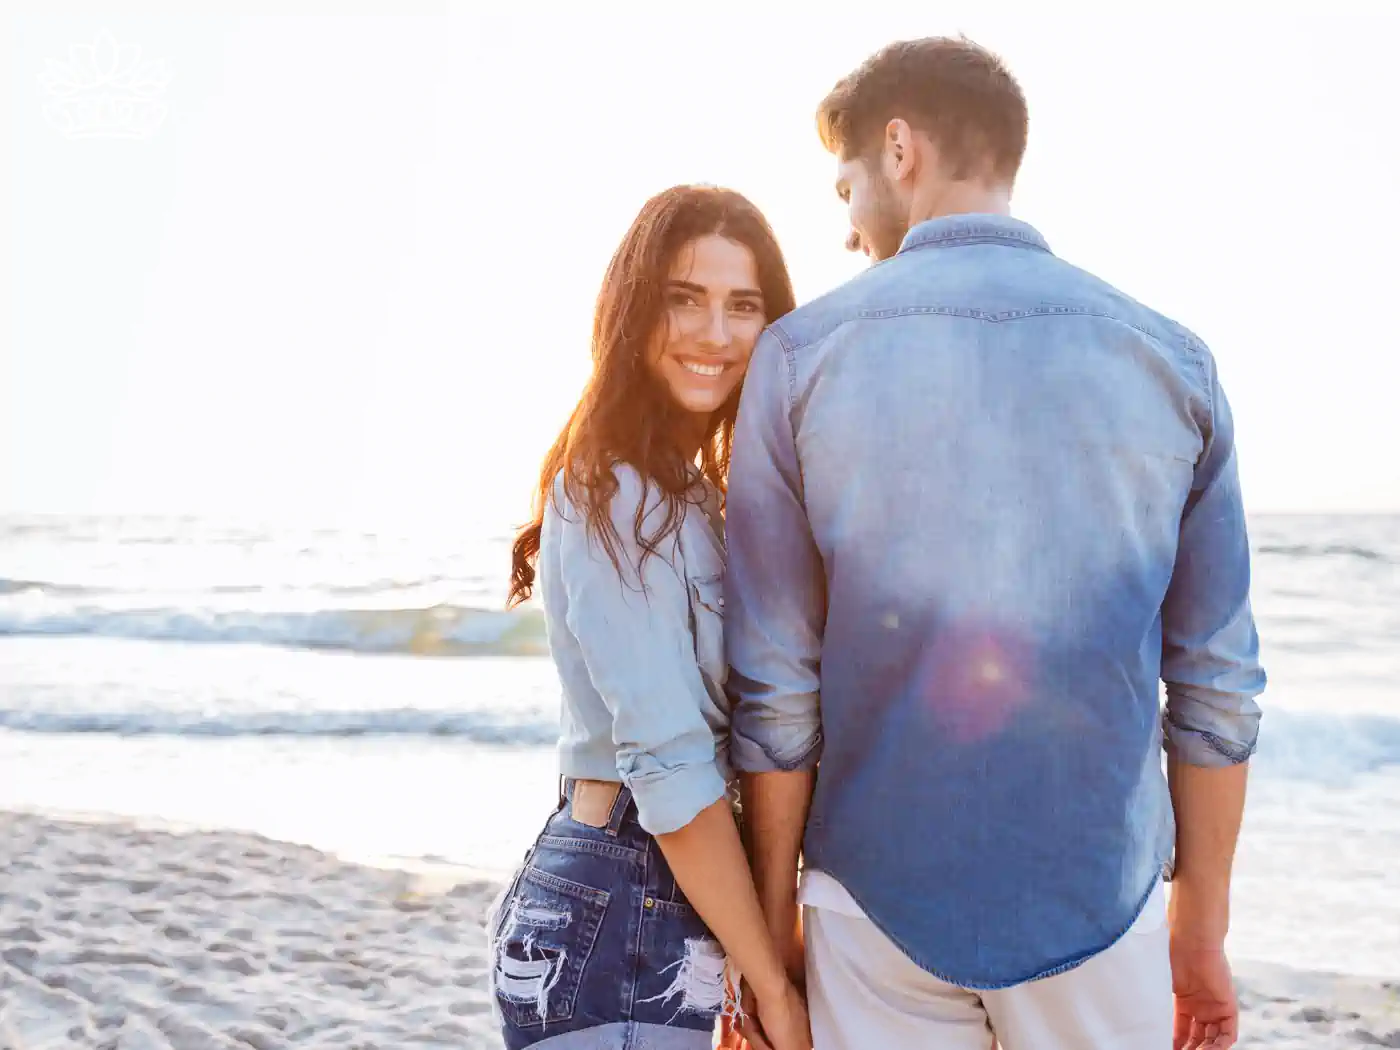 A couple holding hands on a beach, enjoying a serene and romantic moment - Fabulous Flowers and Gifts, Heartfelt Moments Collection.